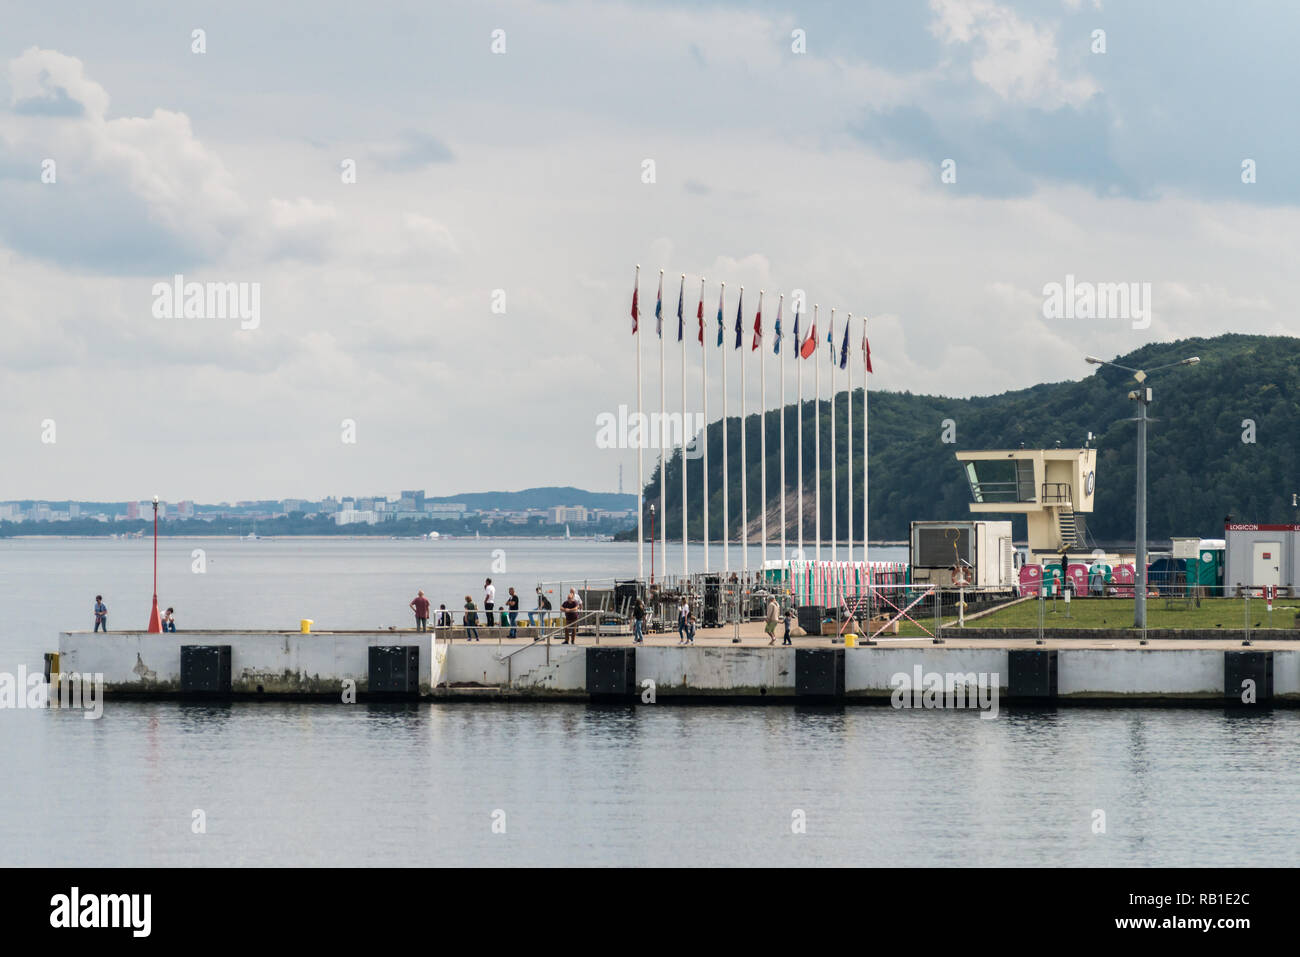 Gdynia, Poland, August 25, 2018; People walking along pier in Gdynia port in cloud day. Stock Photo